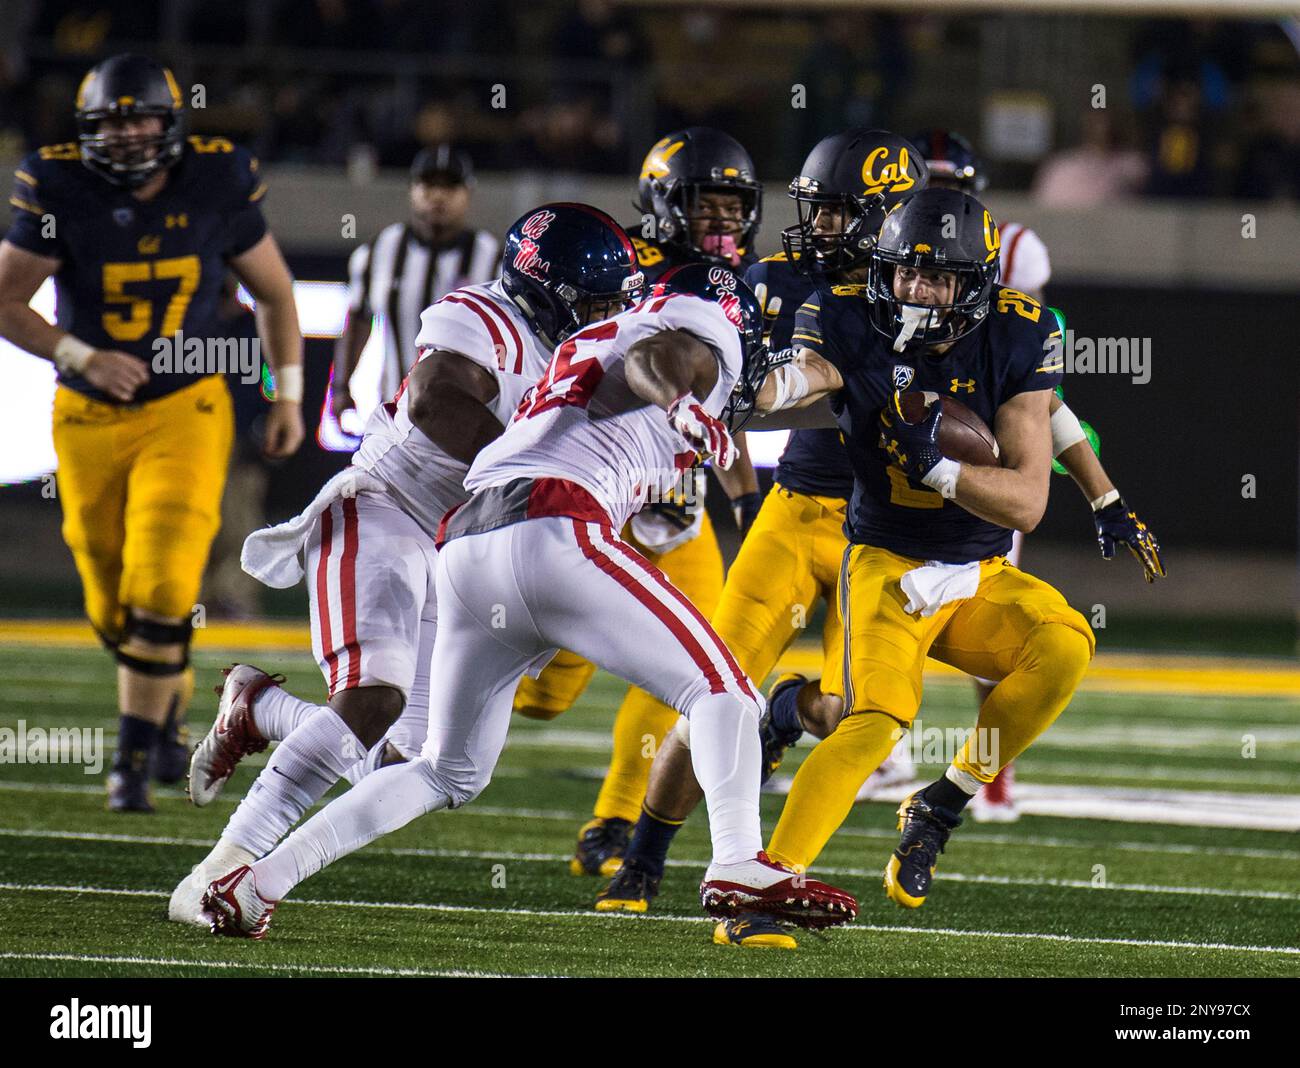 Sept 16 2017 Berkeley CA, U.S.A Cal running back Patrick Laird (28) tries  to advoid a tackle after a short runduring the NCAA Football game between  Ole Miss Rebels and the California